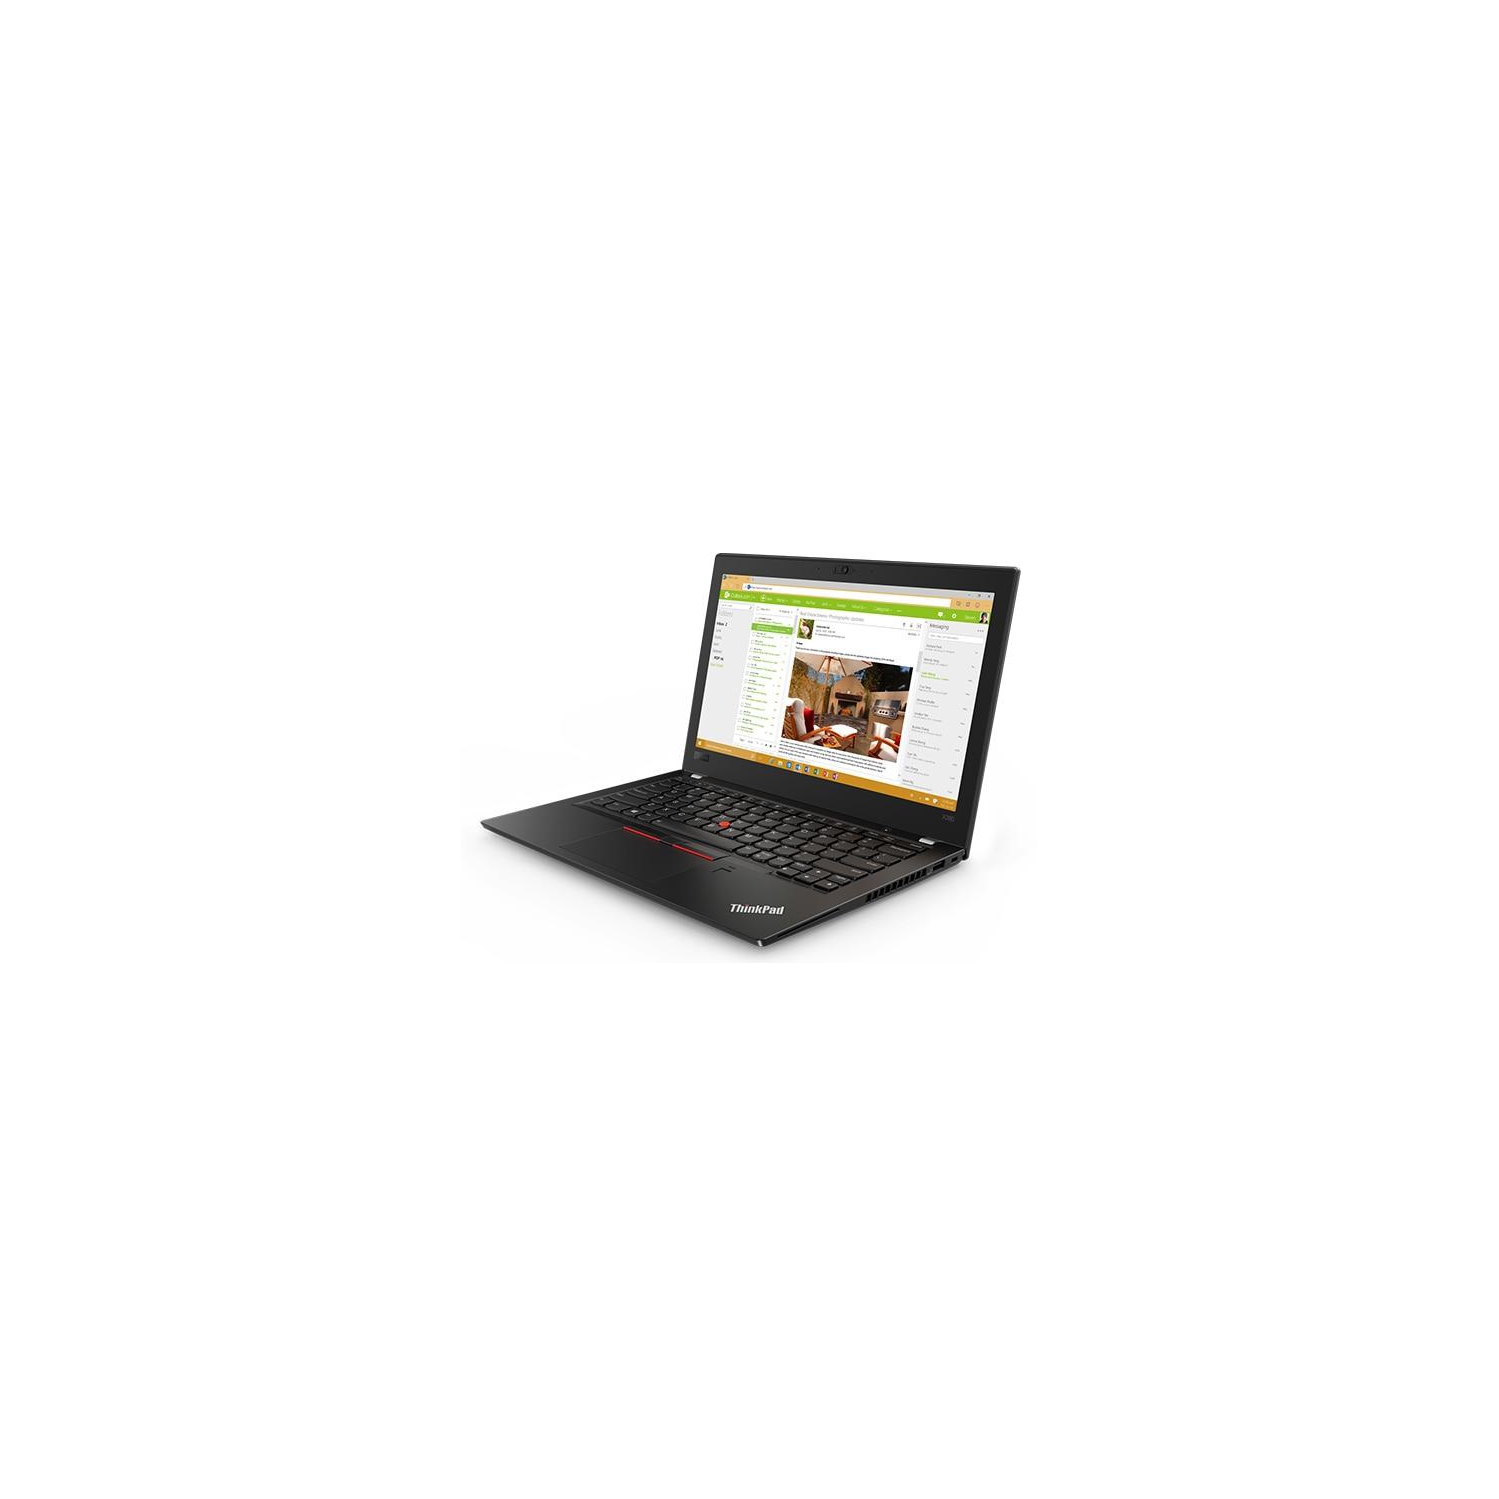 Refurbished (Excellent) - Lenovo Lenovo thinkpad X280 20KEX01800 | 12.5" FHD | Core i5 - 256GB SSD - 8GB RAM | 4 Cores @ 3.4 GHz Certified Refurbished